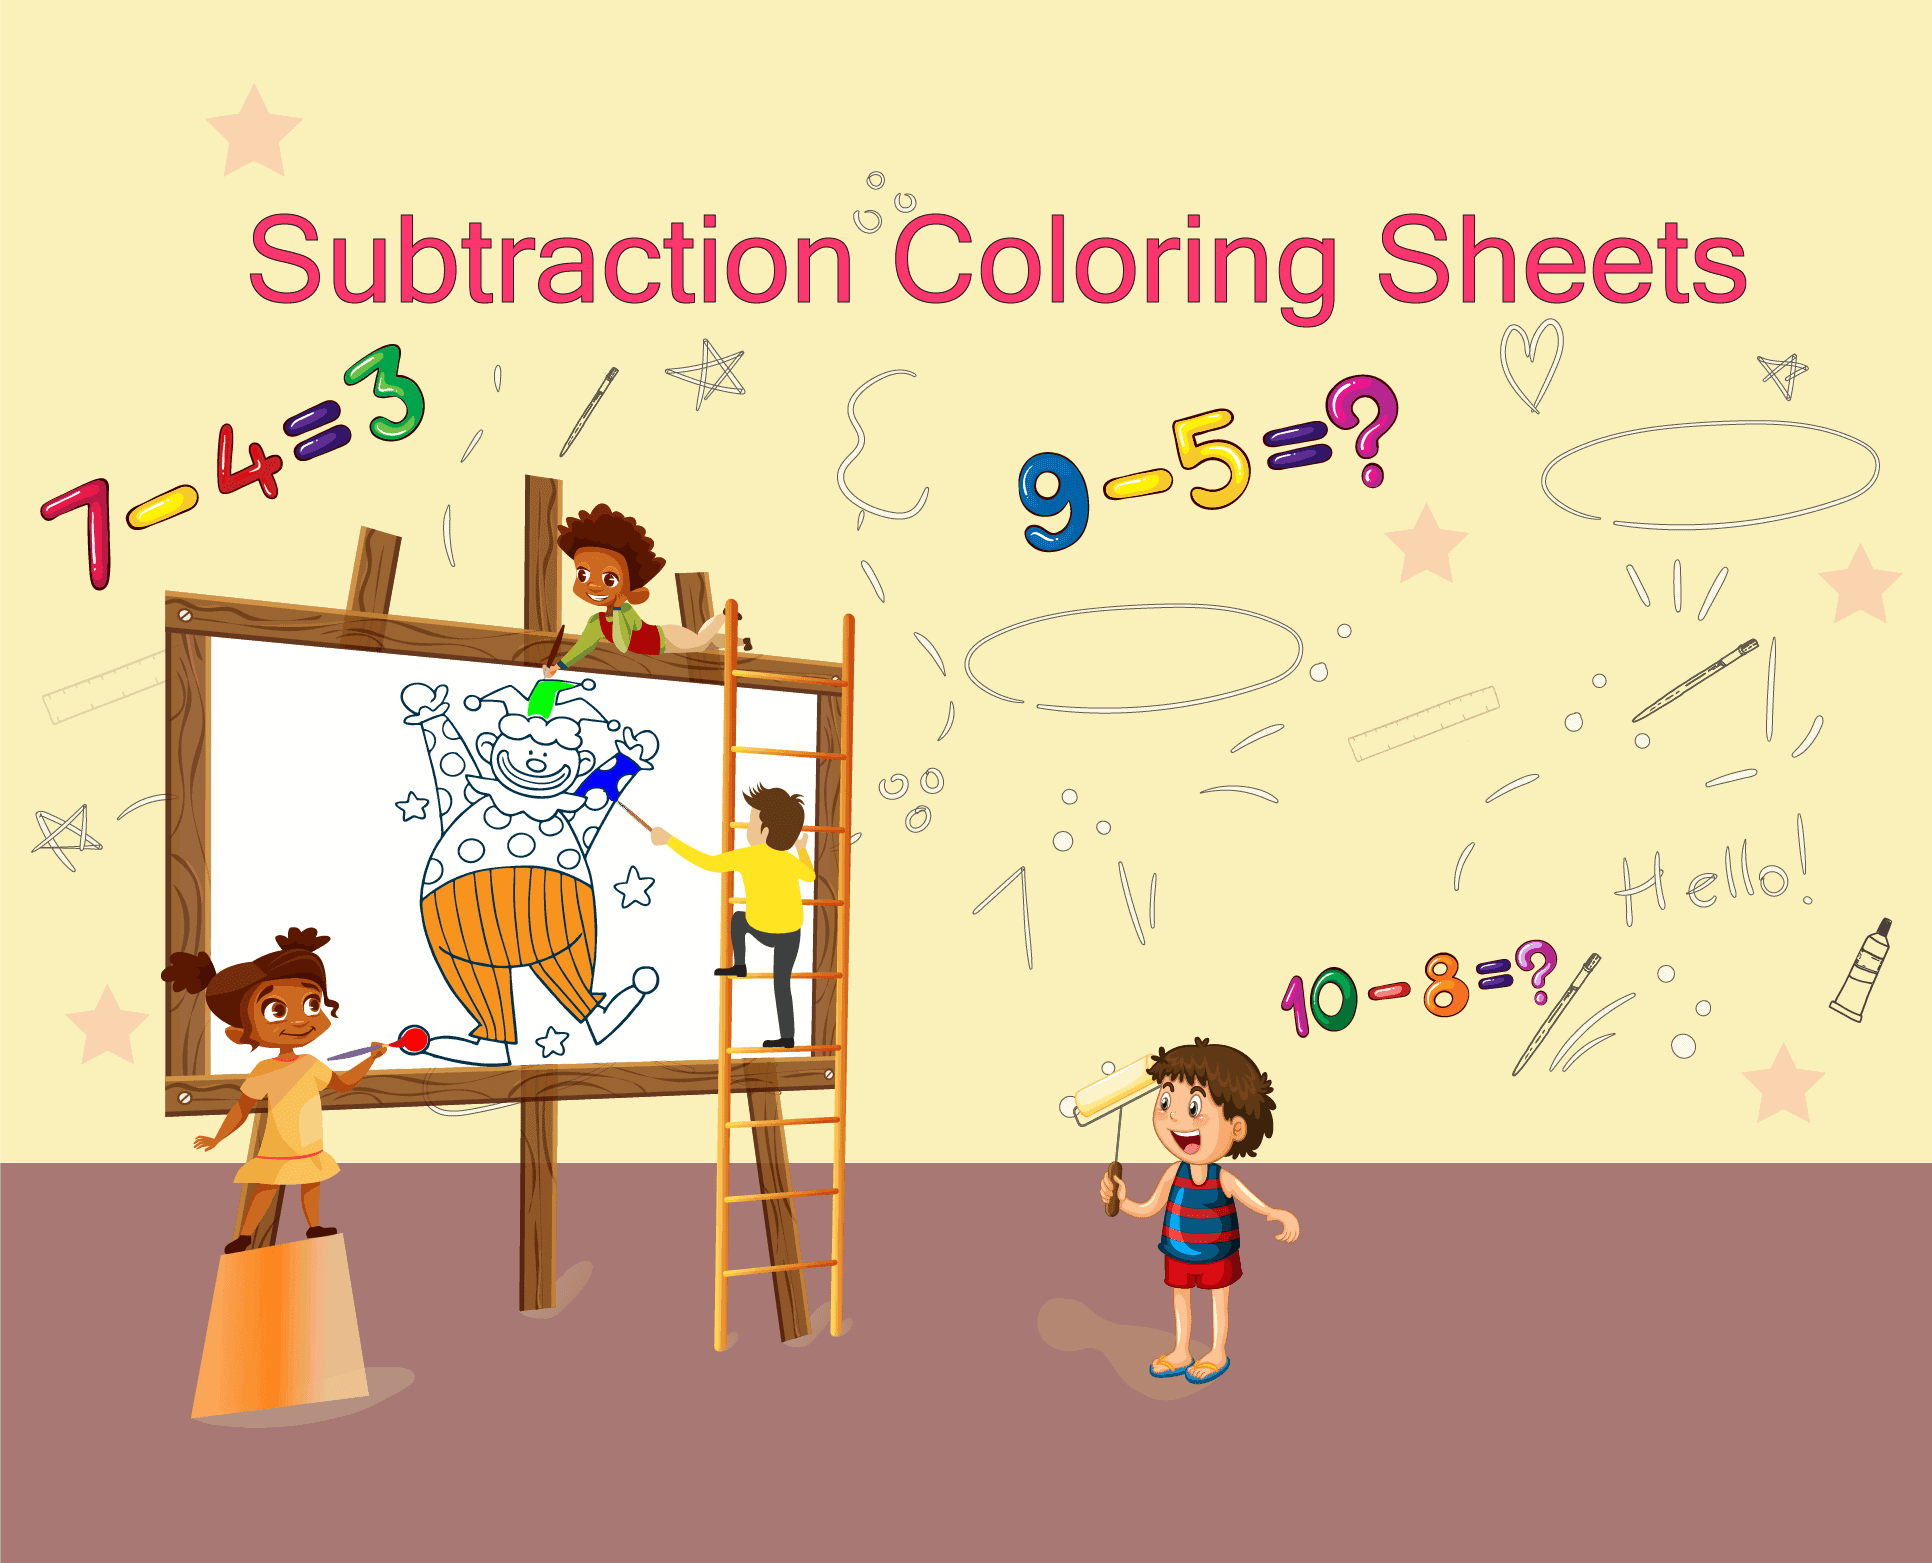 10+ Subtraction Coloring Sheets | Free Printables